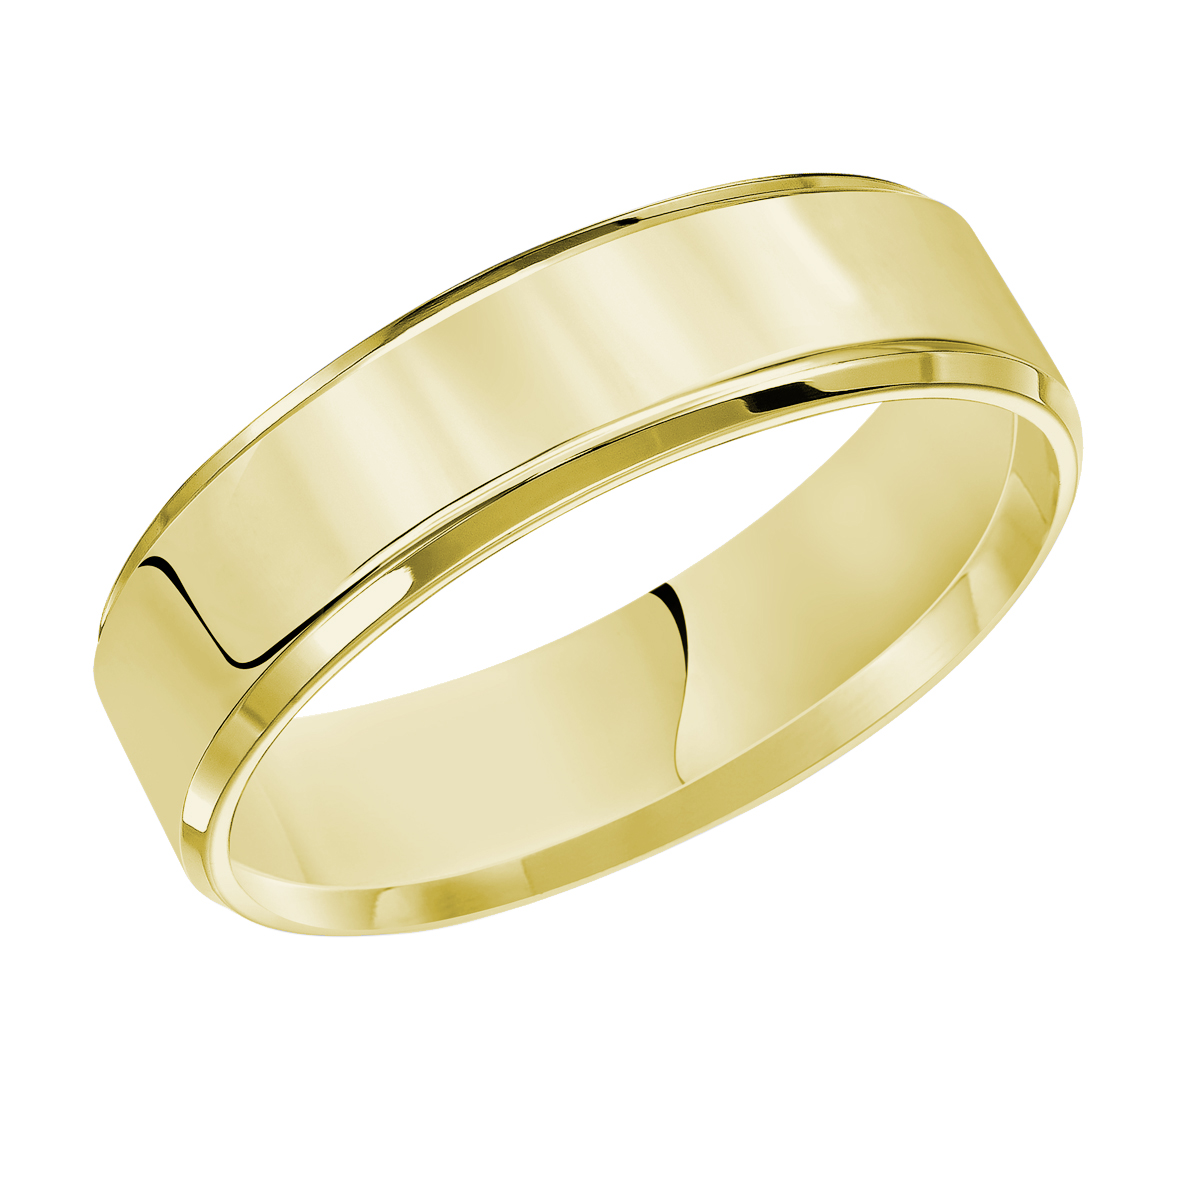 Yellow Gold Comfort Fit Flat 7 mm Wedding Band with Beveled Edge, Size ...